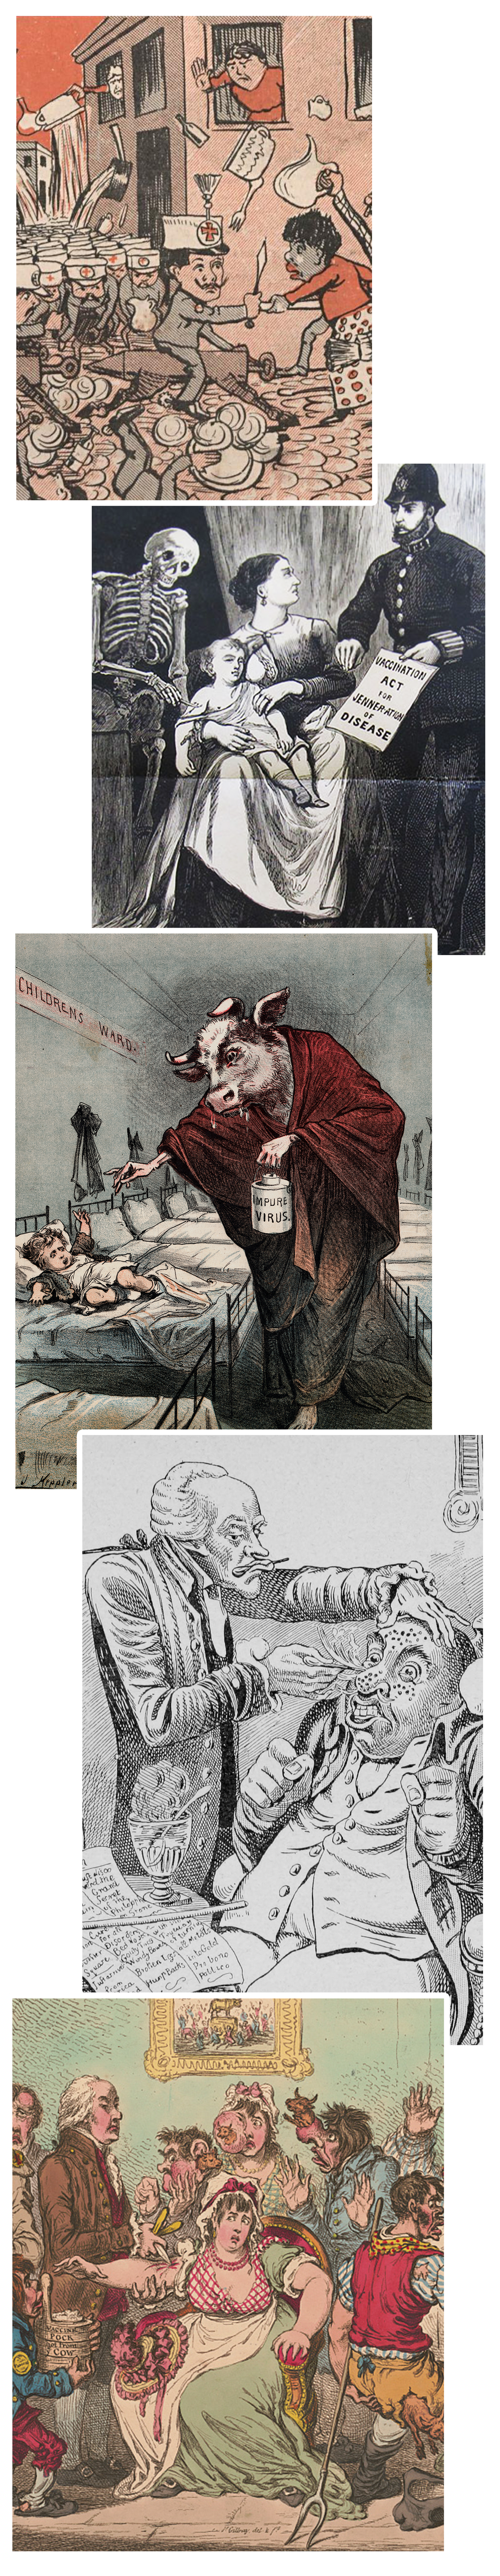 Mistrust of vaccinations has a long history, as depicted in these cartoons and posters created in response to the smallpox vaccine